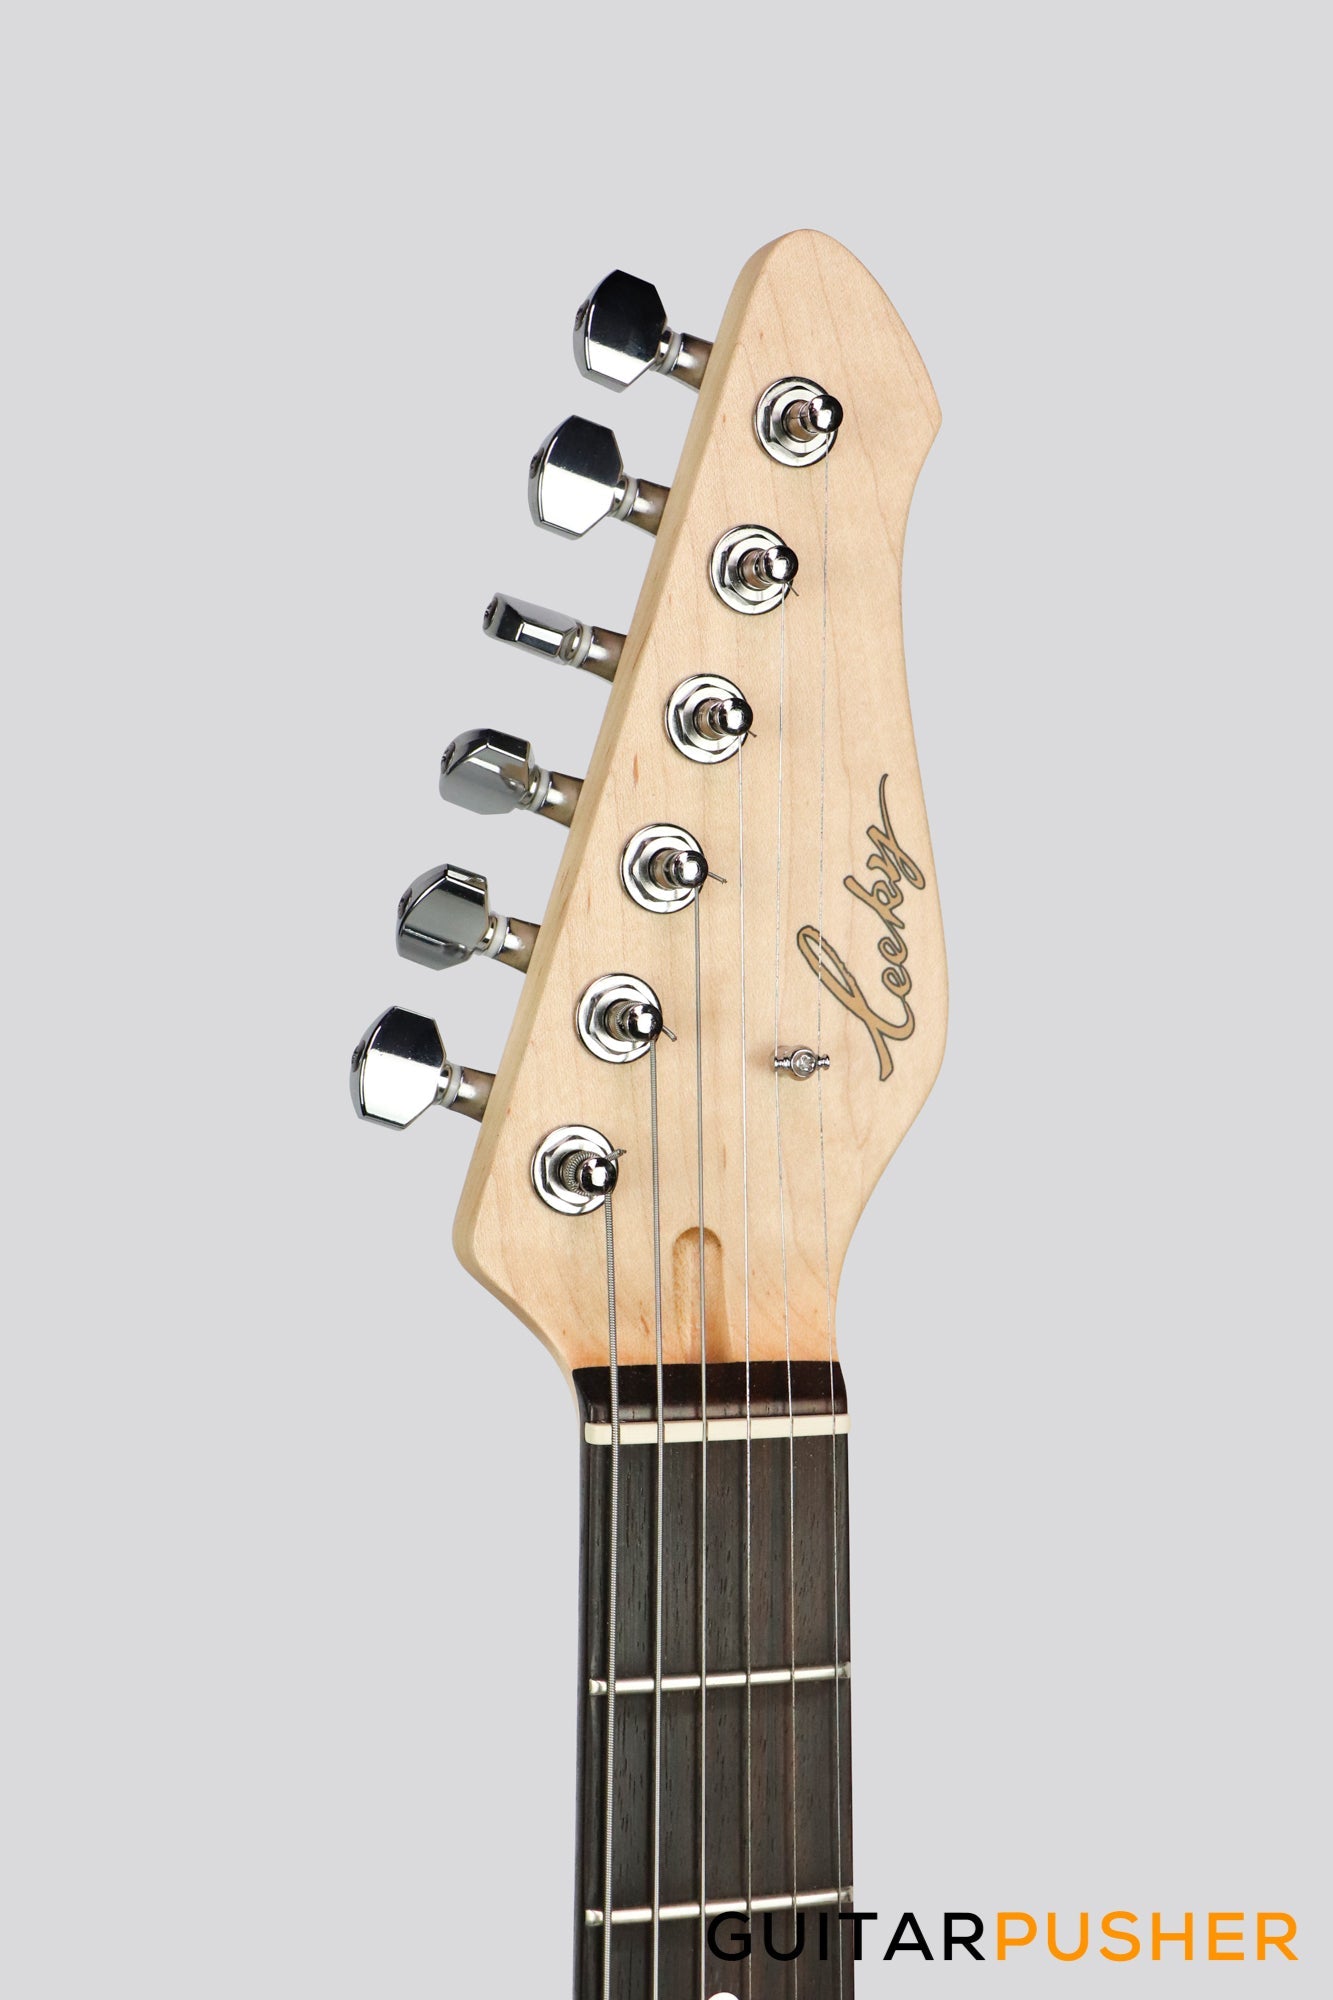 Leeky L-Series L15 S Style Electric Guitar (Flamed Maple Top/Rosewood Fingerboard) - Transblue